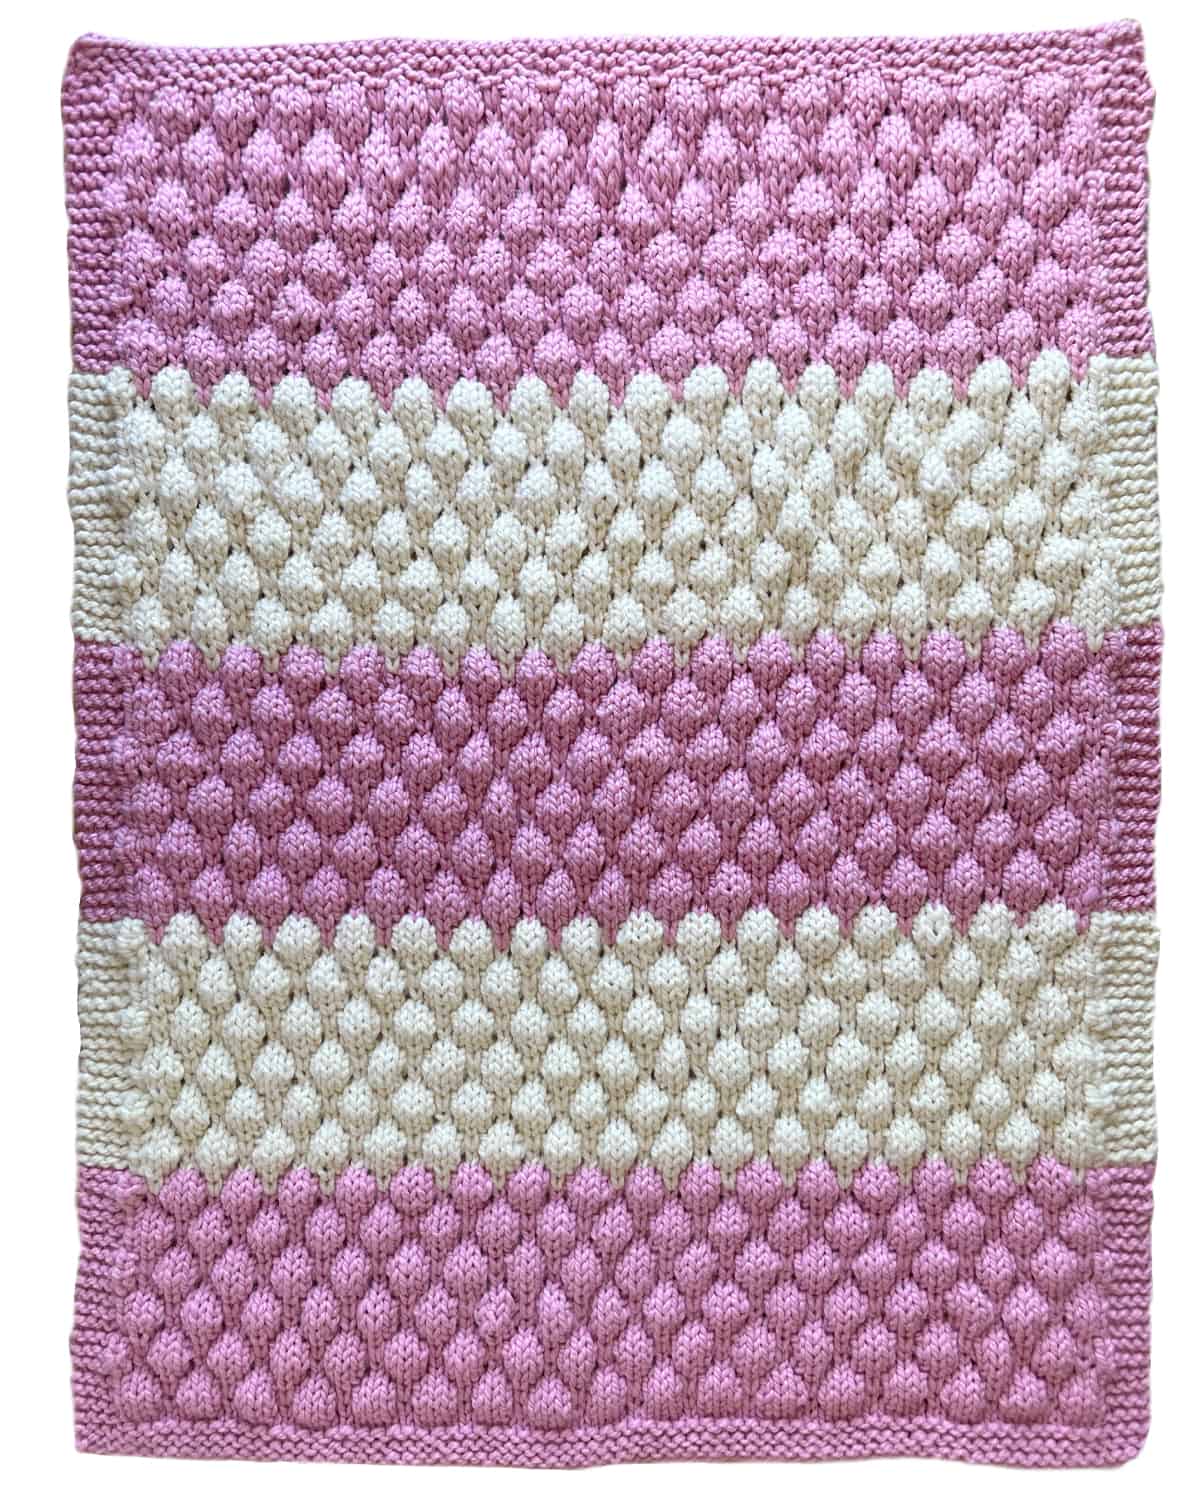 Afghan Blanket knitted in Bubble Stitch with pink and cream color yarn.